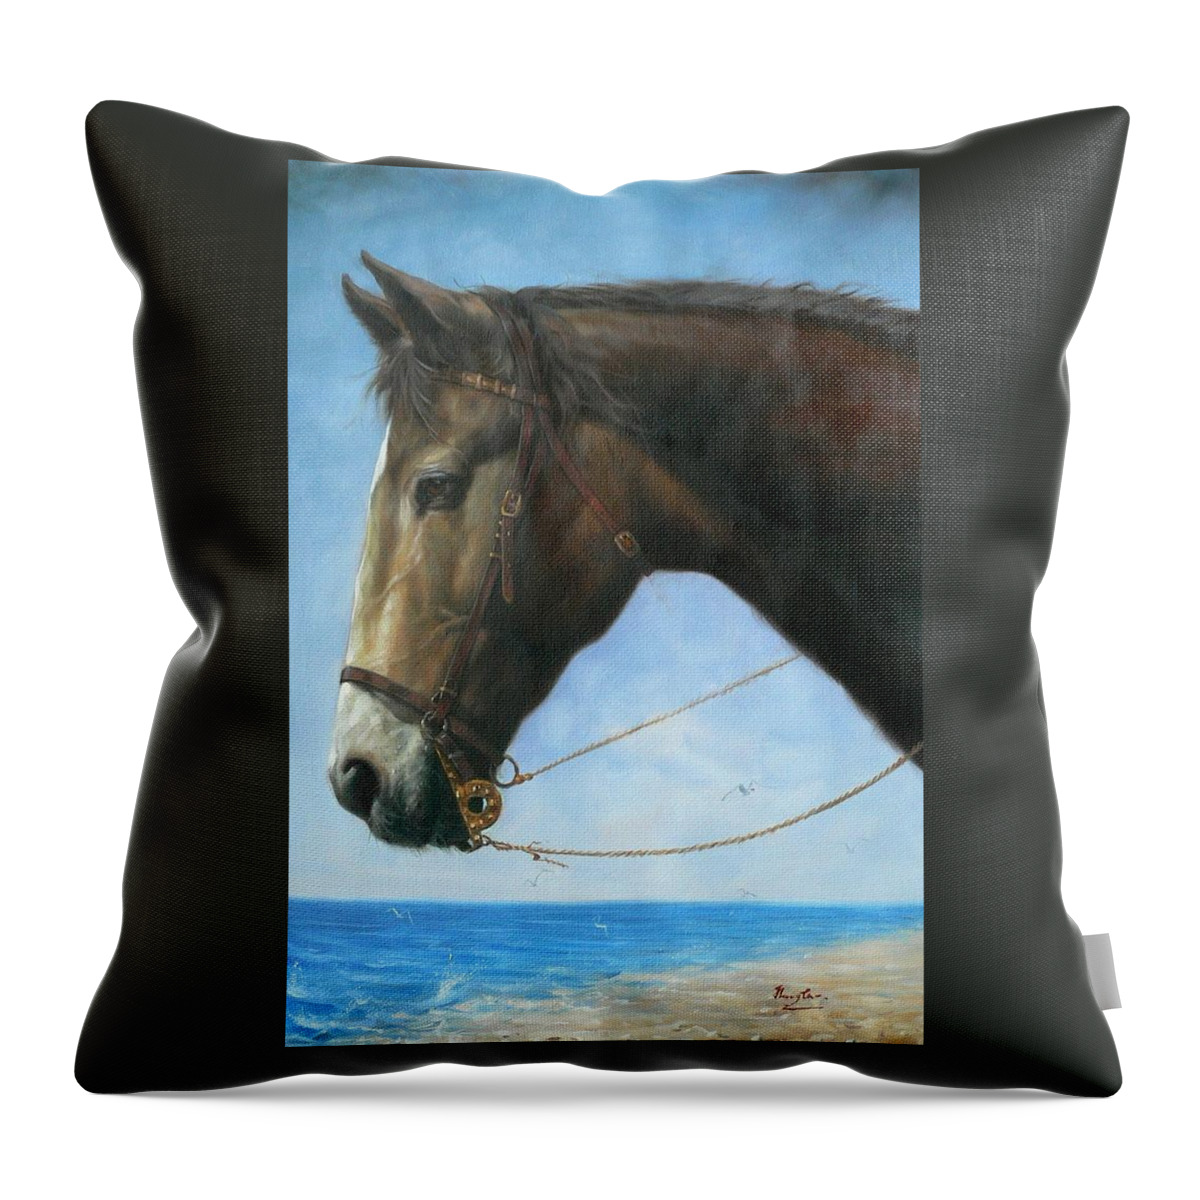 Original Throw Pillow featuring the painting Original Animal Oil Painting Art-horse-04 by Hongtao Huang